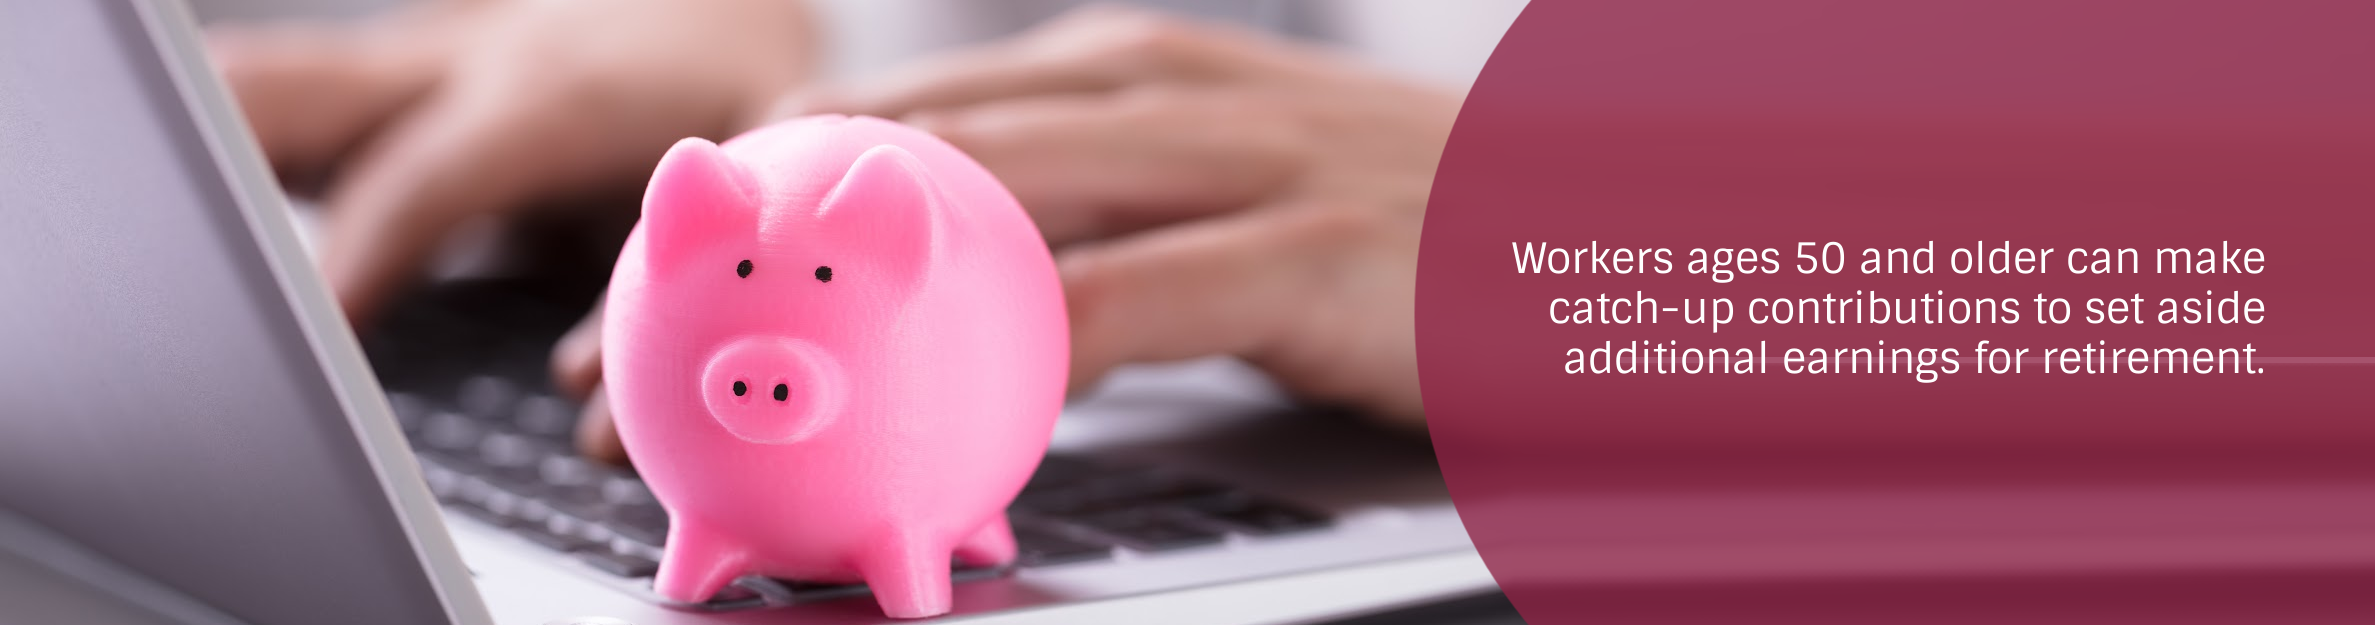 Photo: Piggy bank on a laptop
Text: Workers ages 50 and older can make catch-up contributions to set aside additional earnings for retirement.